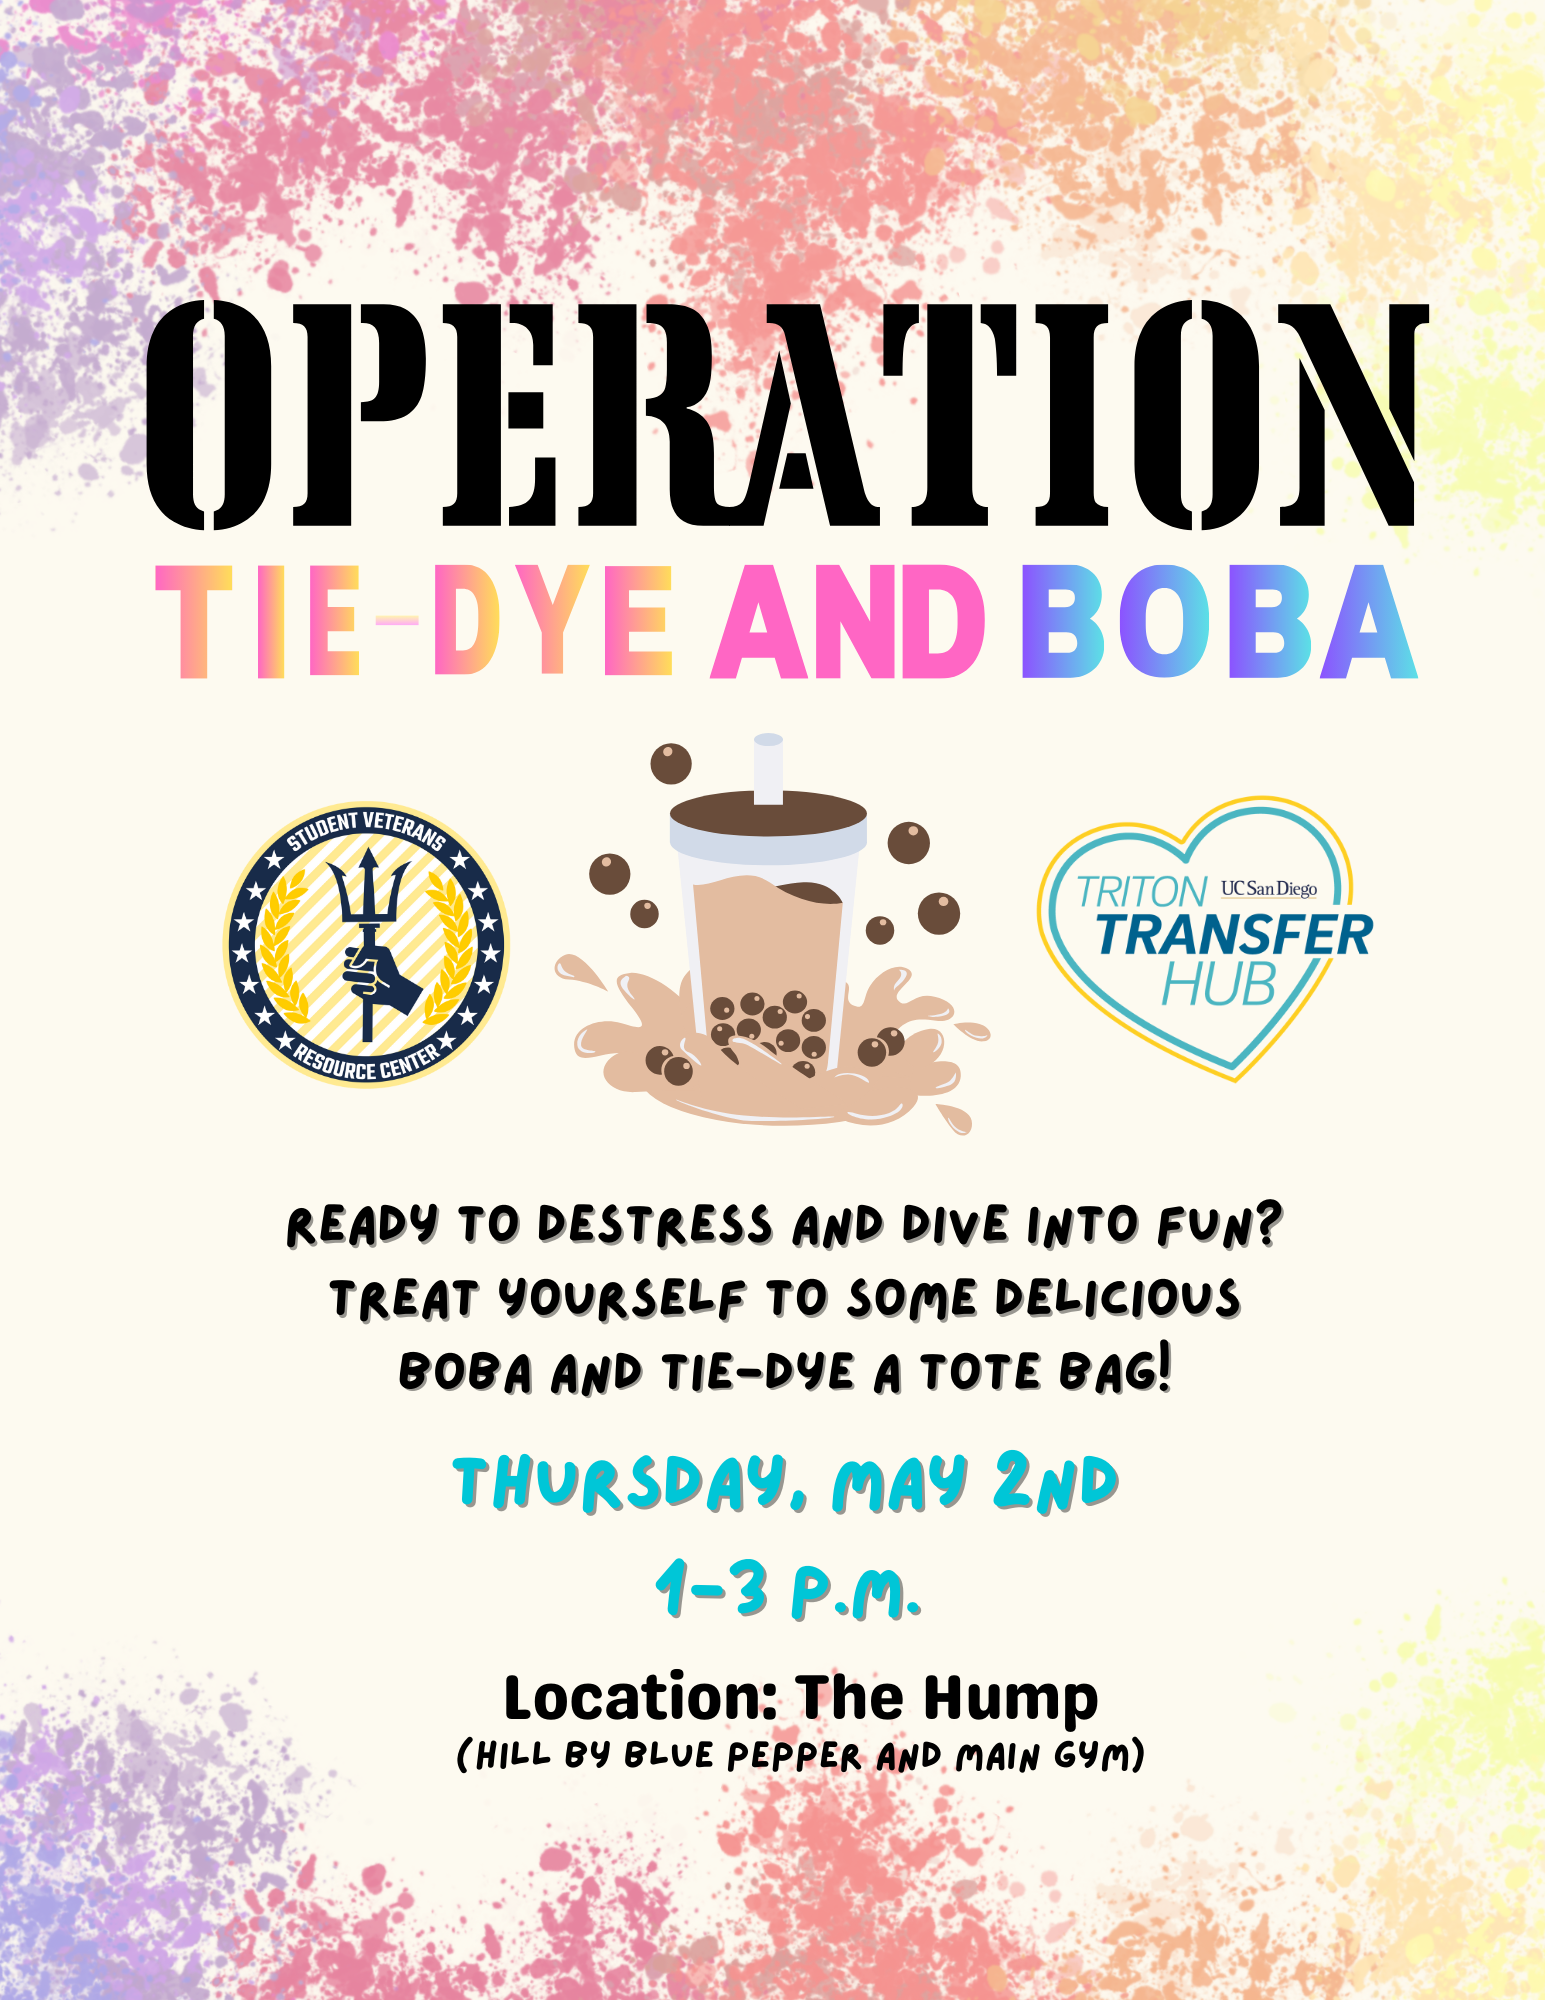 OPERATION-TIE-DYE-AND-BOBA.png